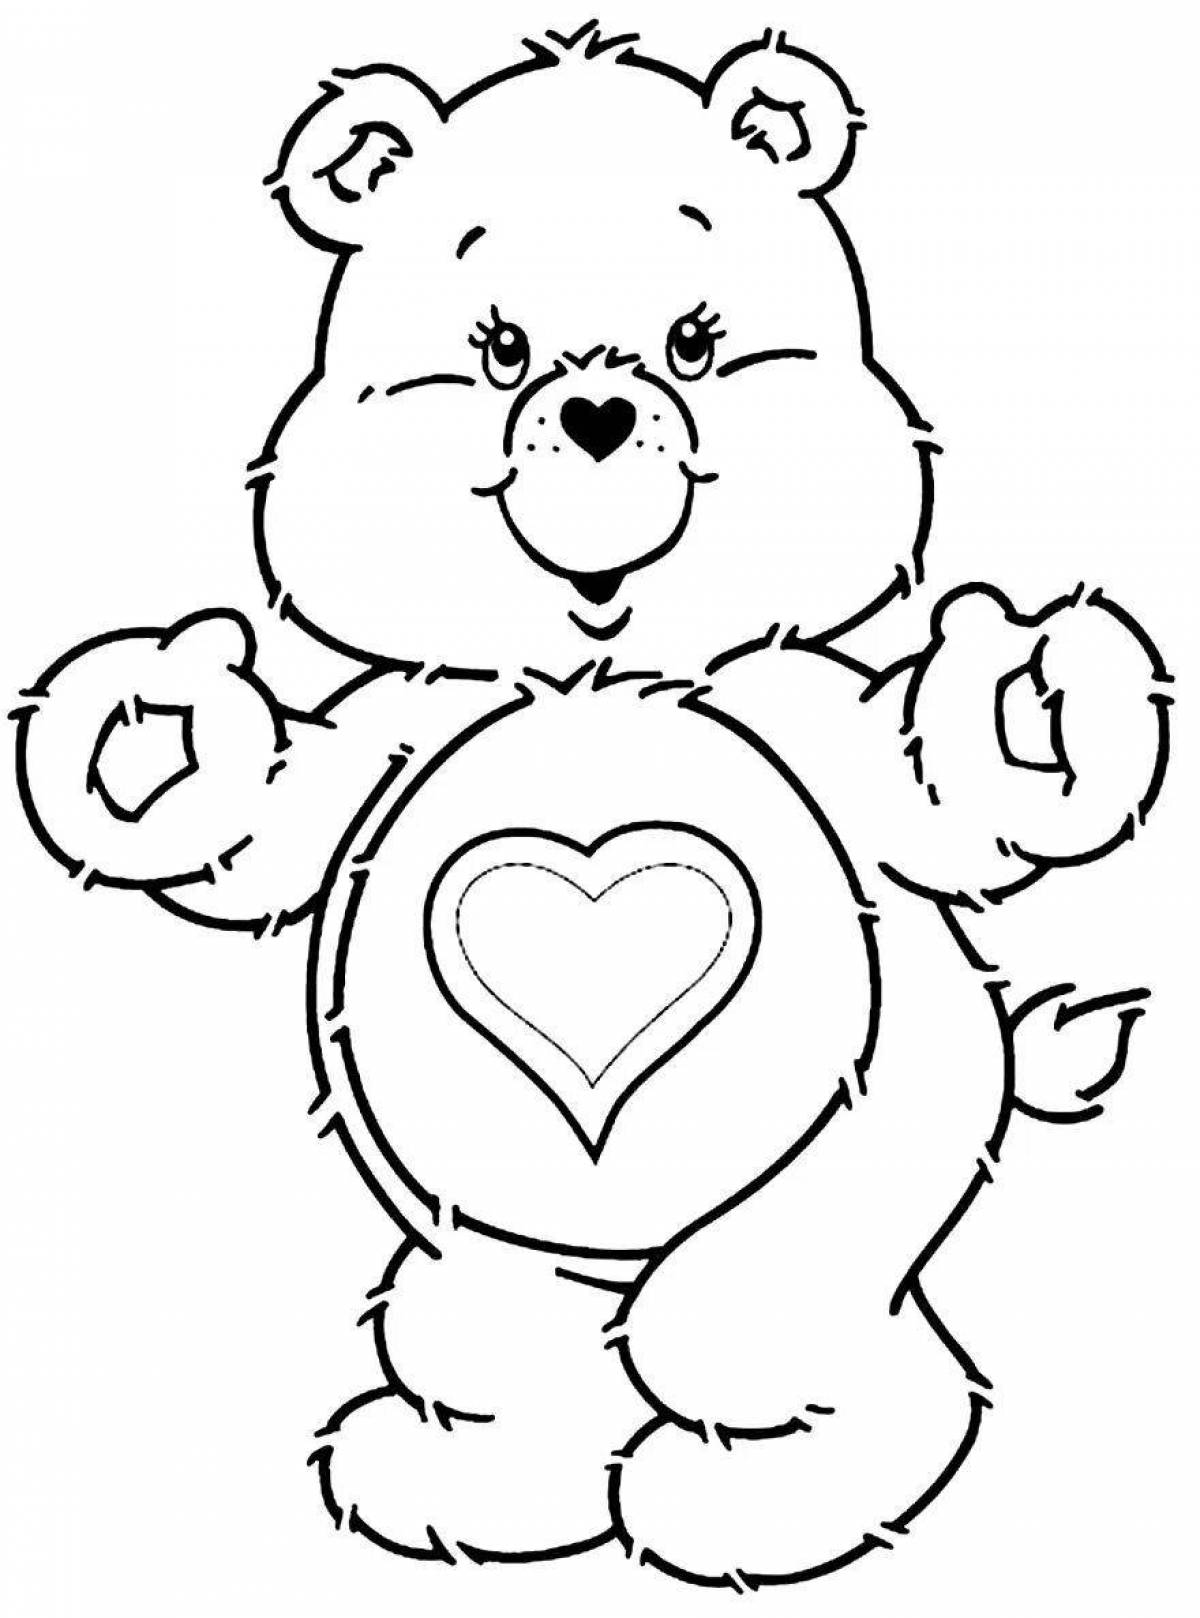 Cute and adorable bear coloring book